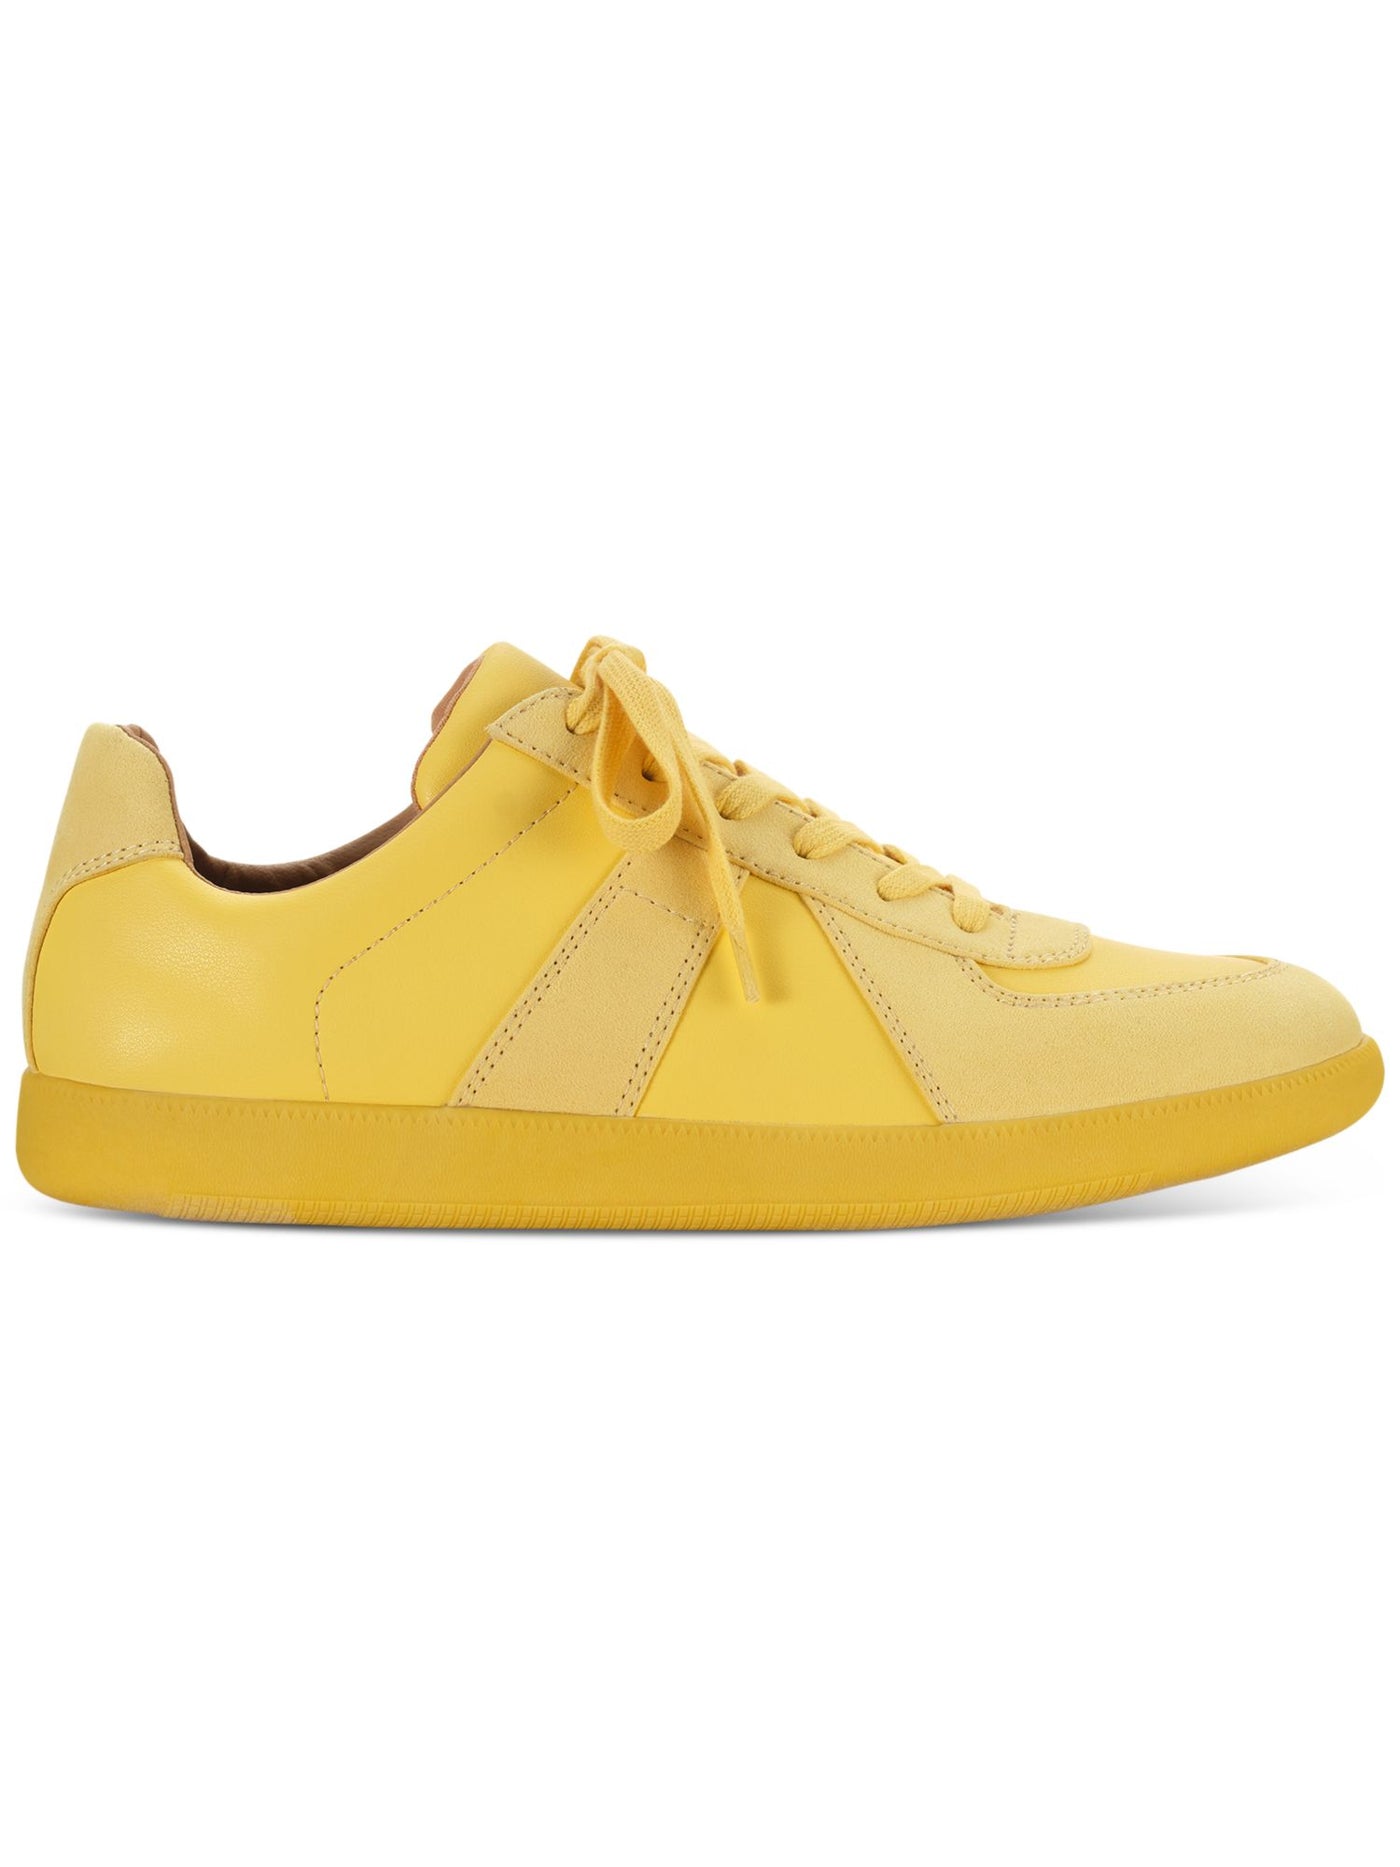 INC Mens Yellow Padded Comfort Harlan Round Toe Platform Lace-Up Sneakers Shoes 10.5 M